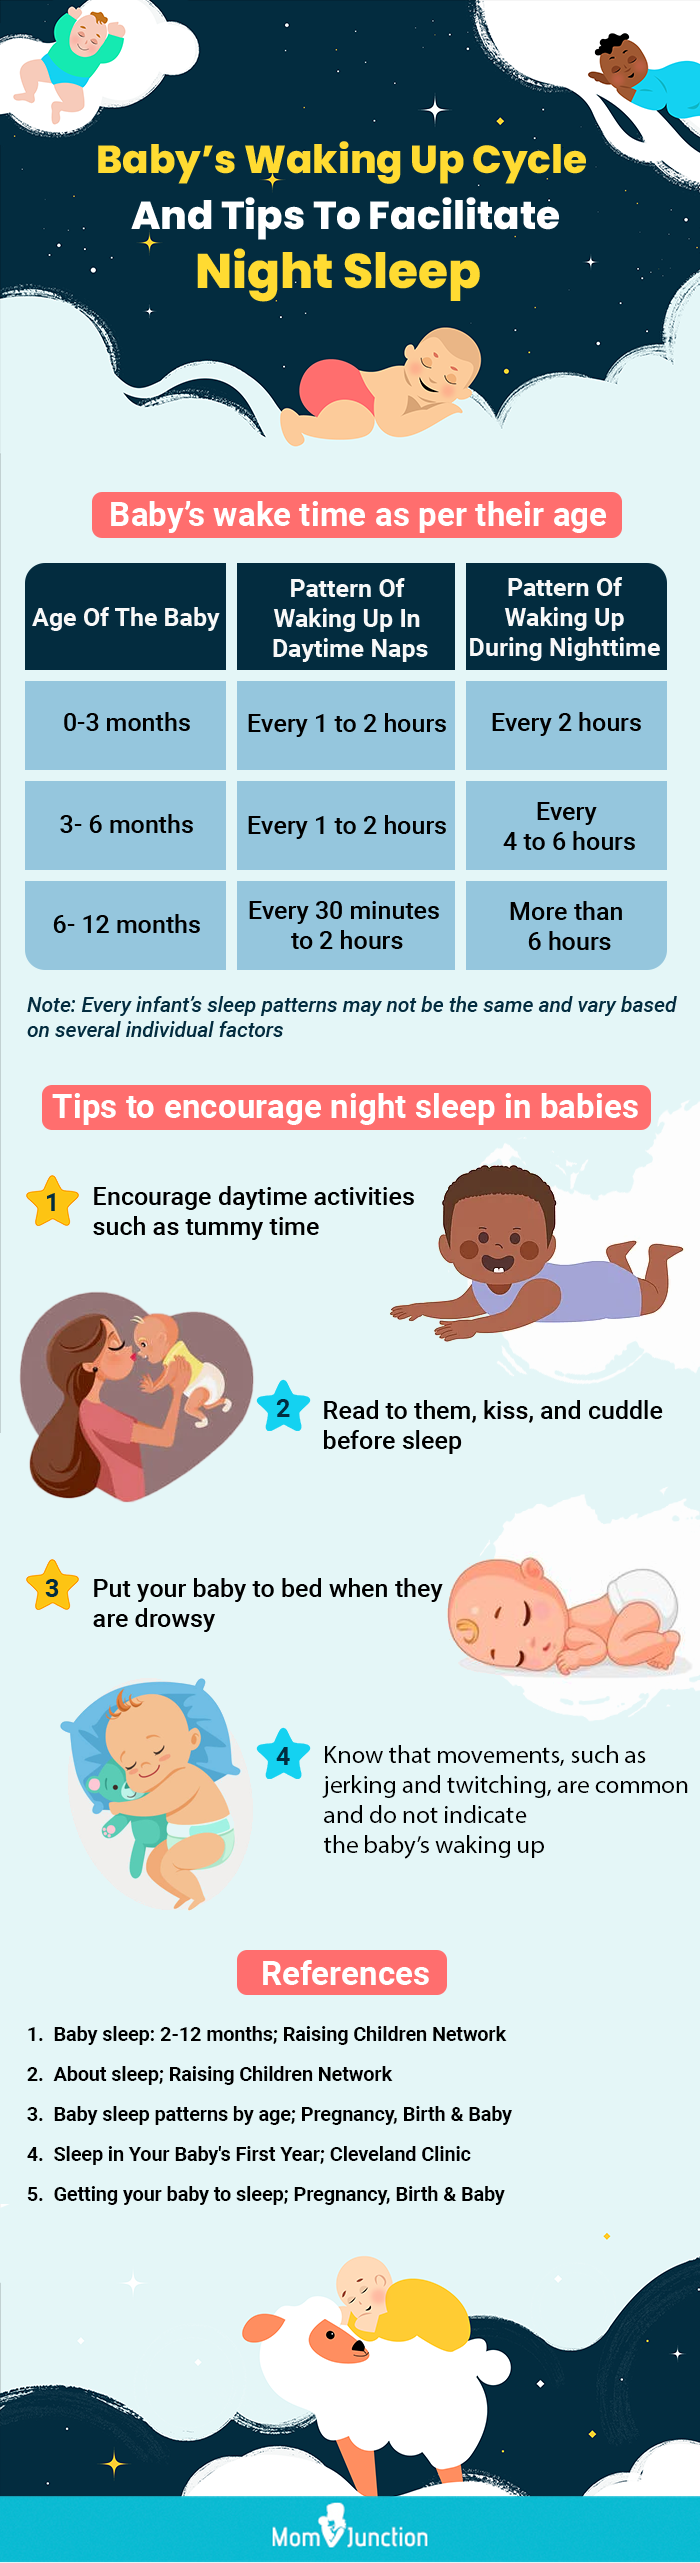 baby waking up cycle and tips to facilitate night sleep (infographic)